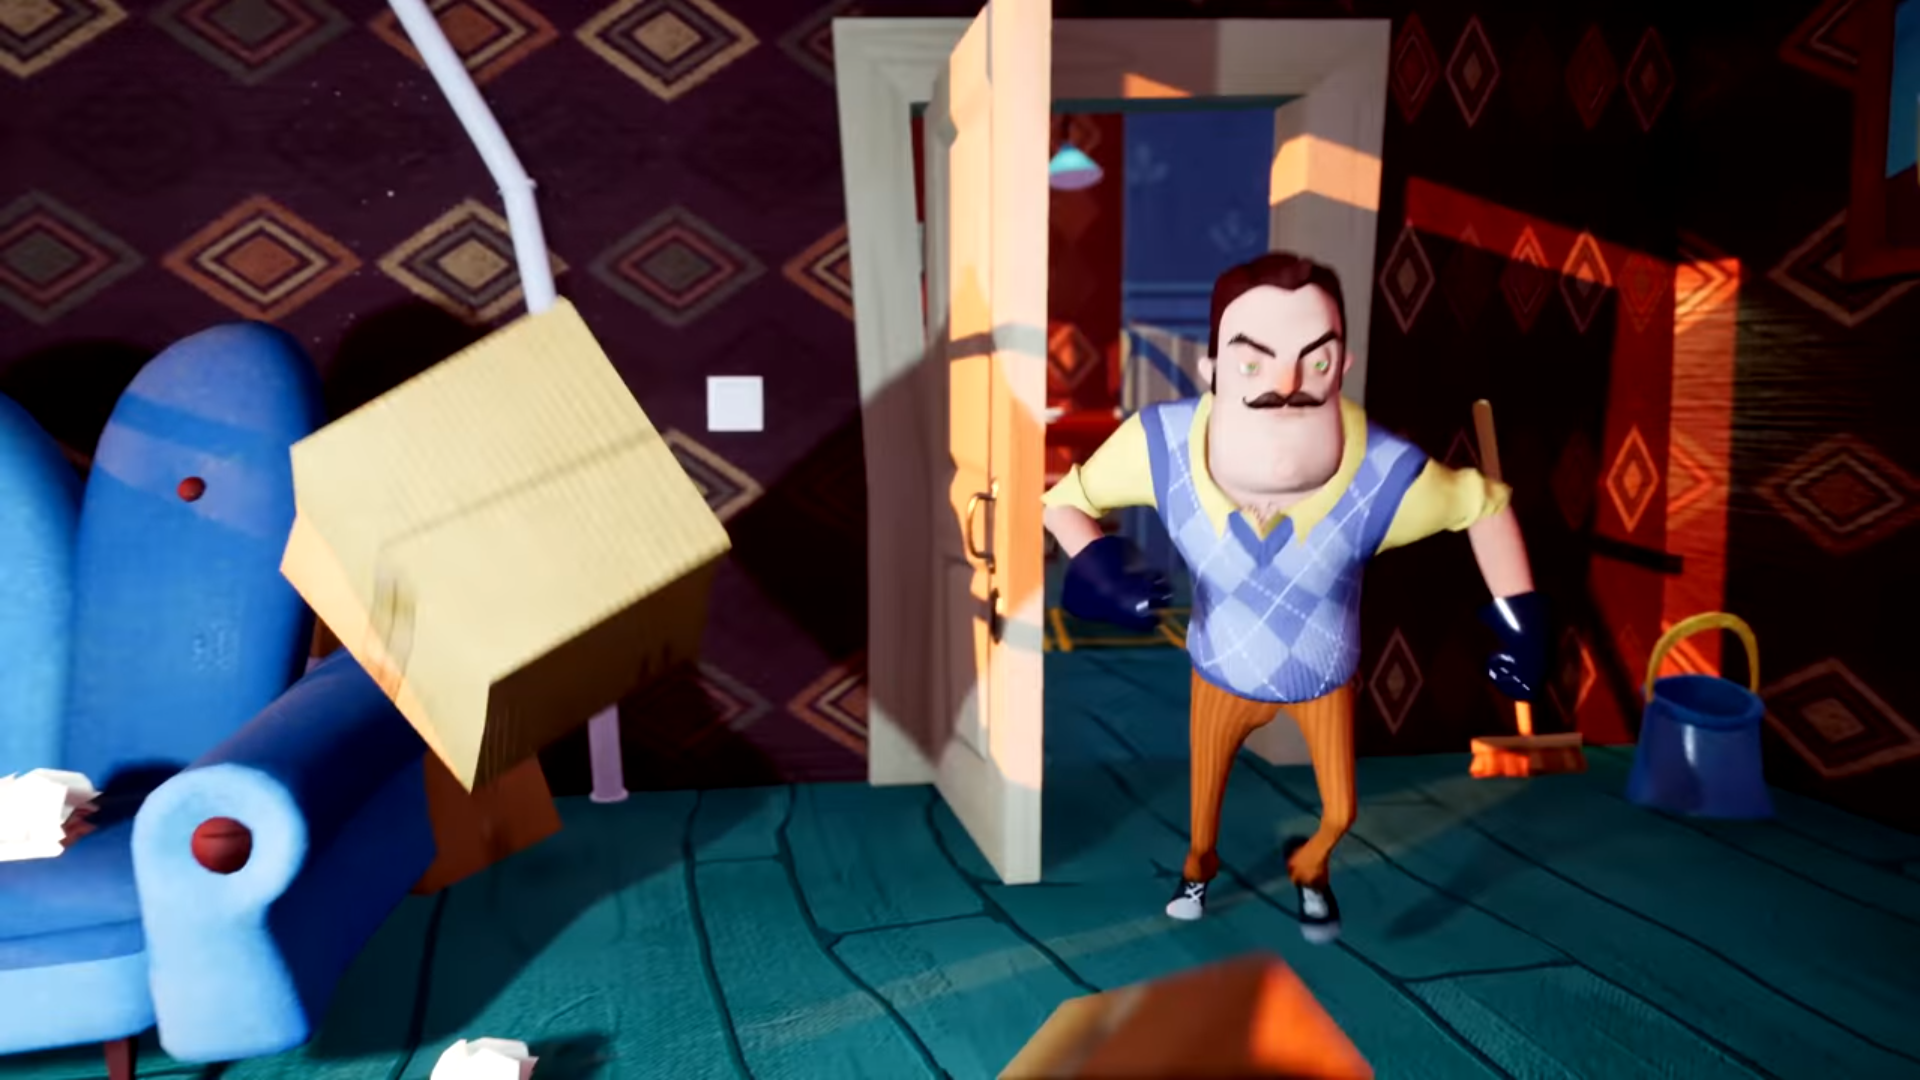 It is not my neighbor. Привет сосед 6. Сосед игрушка. Игрушки привет сосед. Hello Neighbor Xbox.